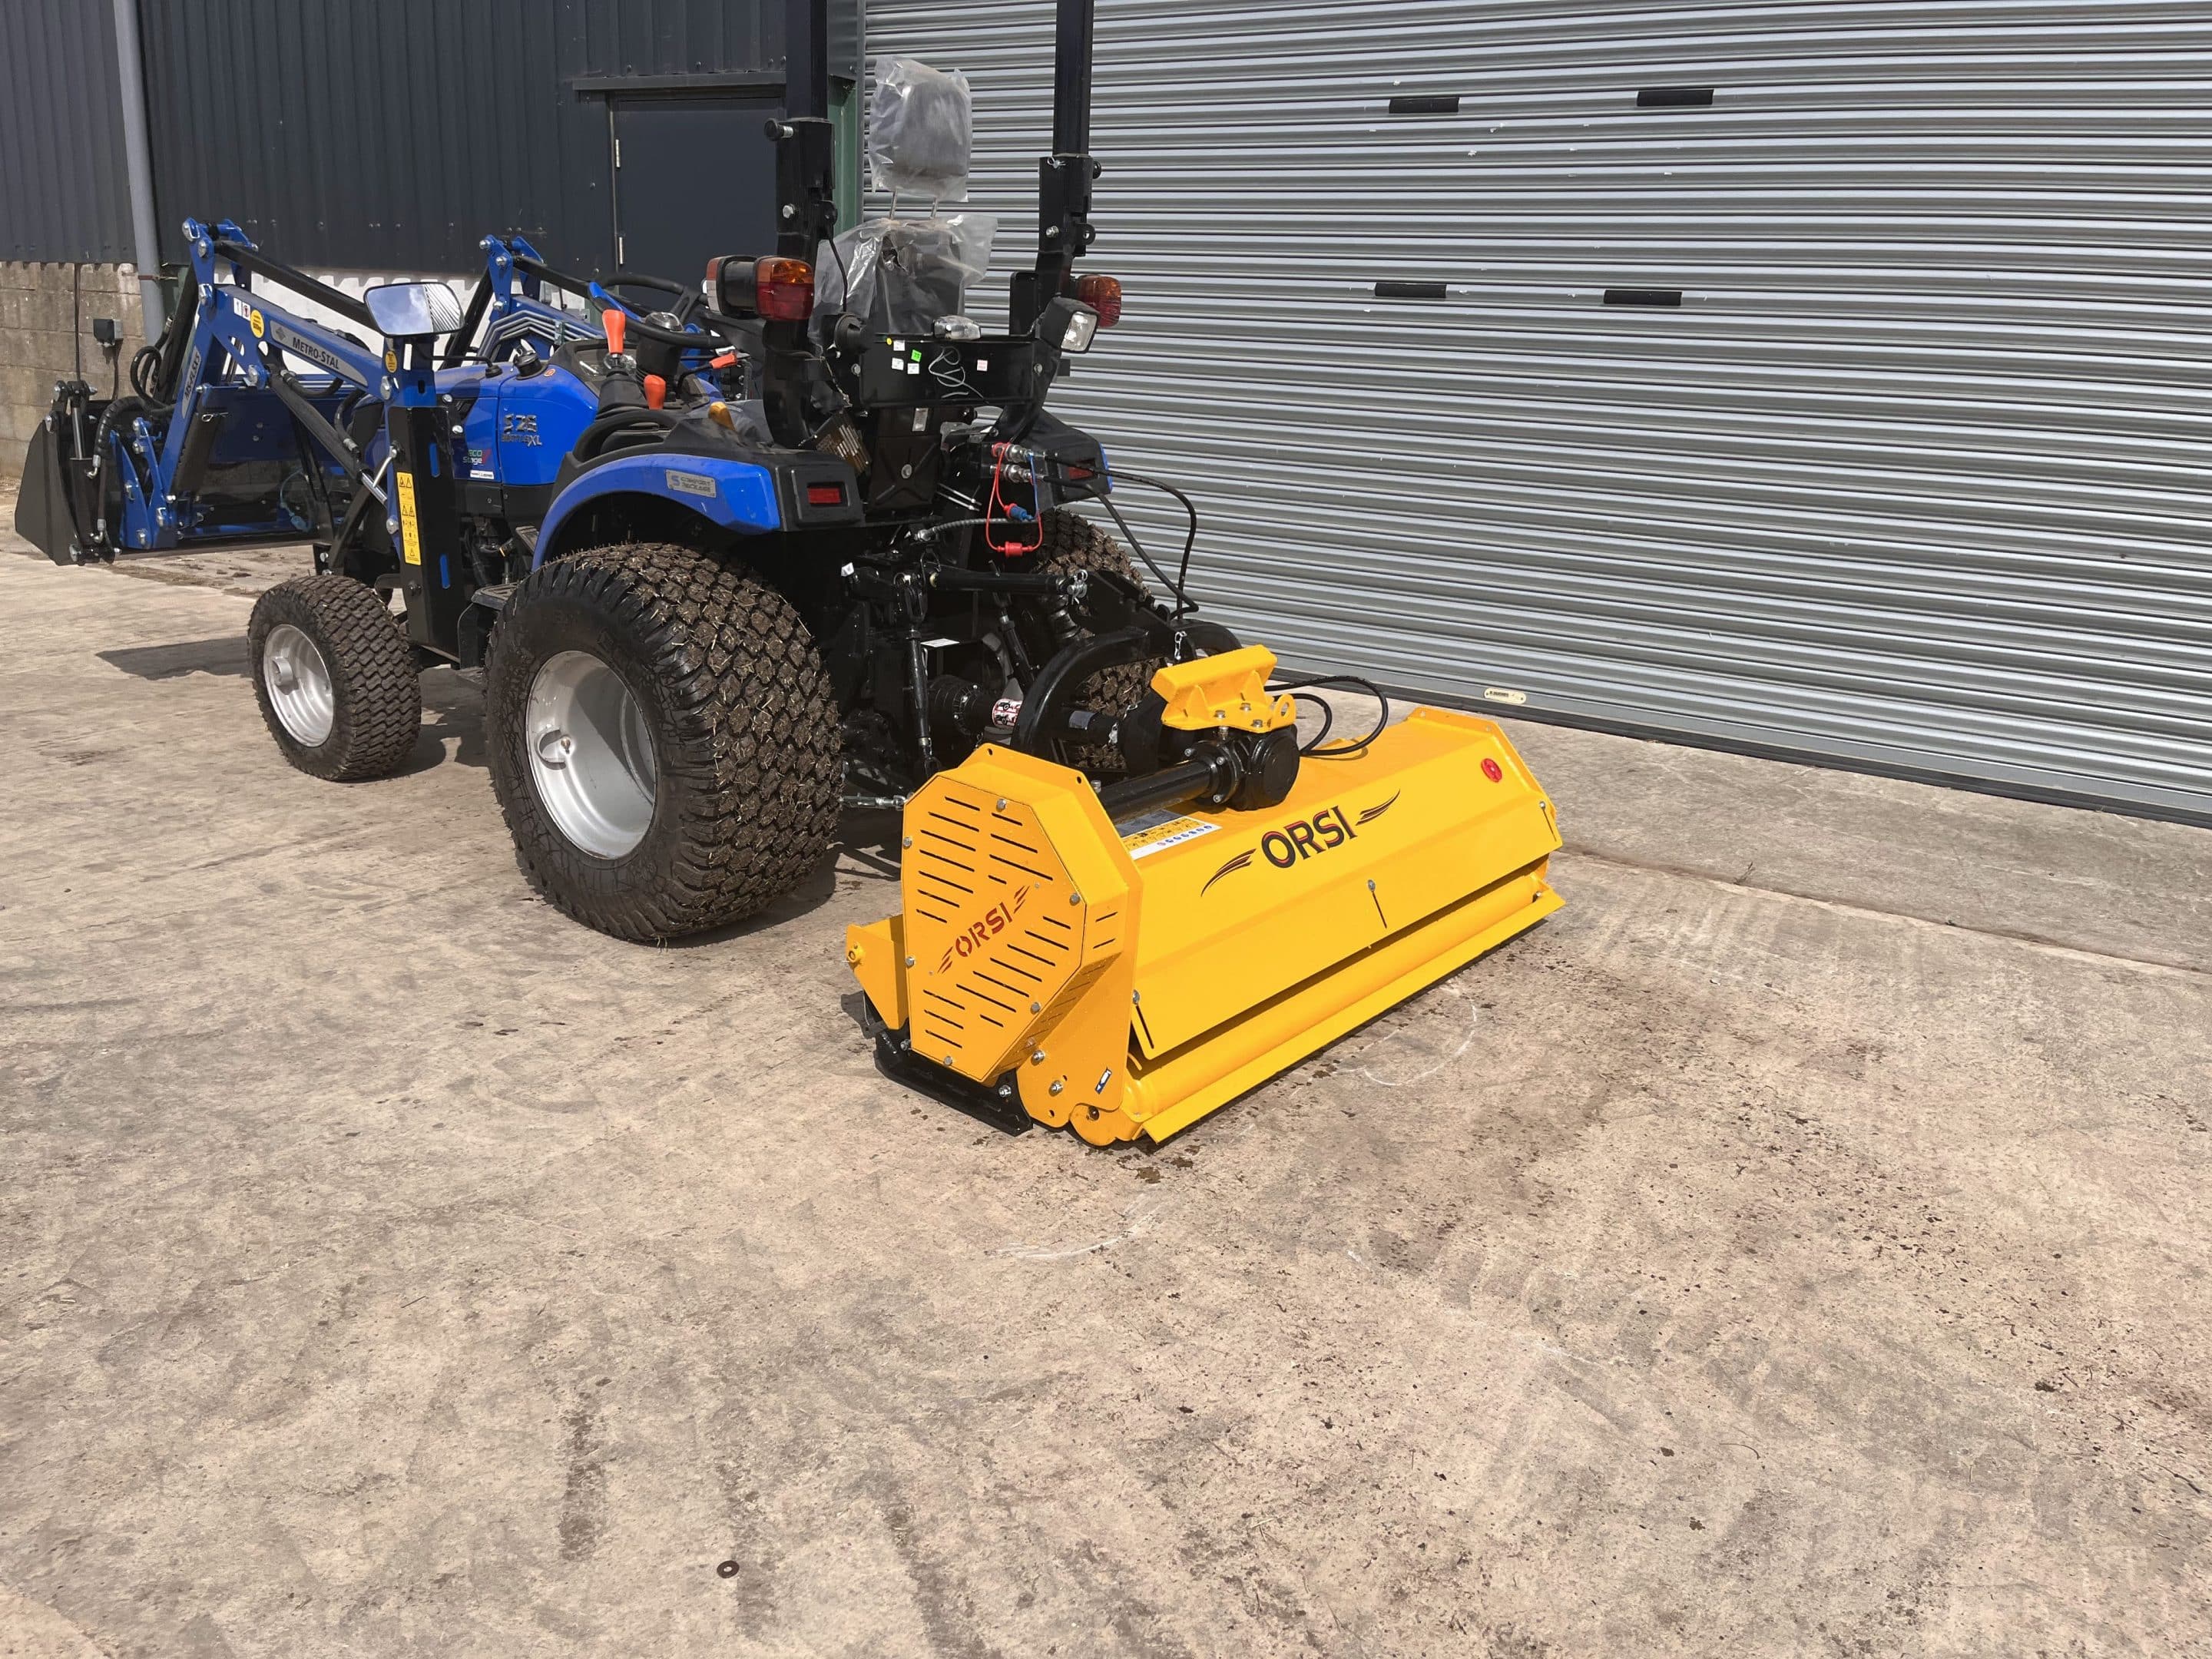 Berky Hydro Flail Mower with hydraulic flap & clearing belt